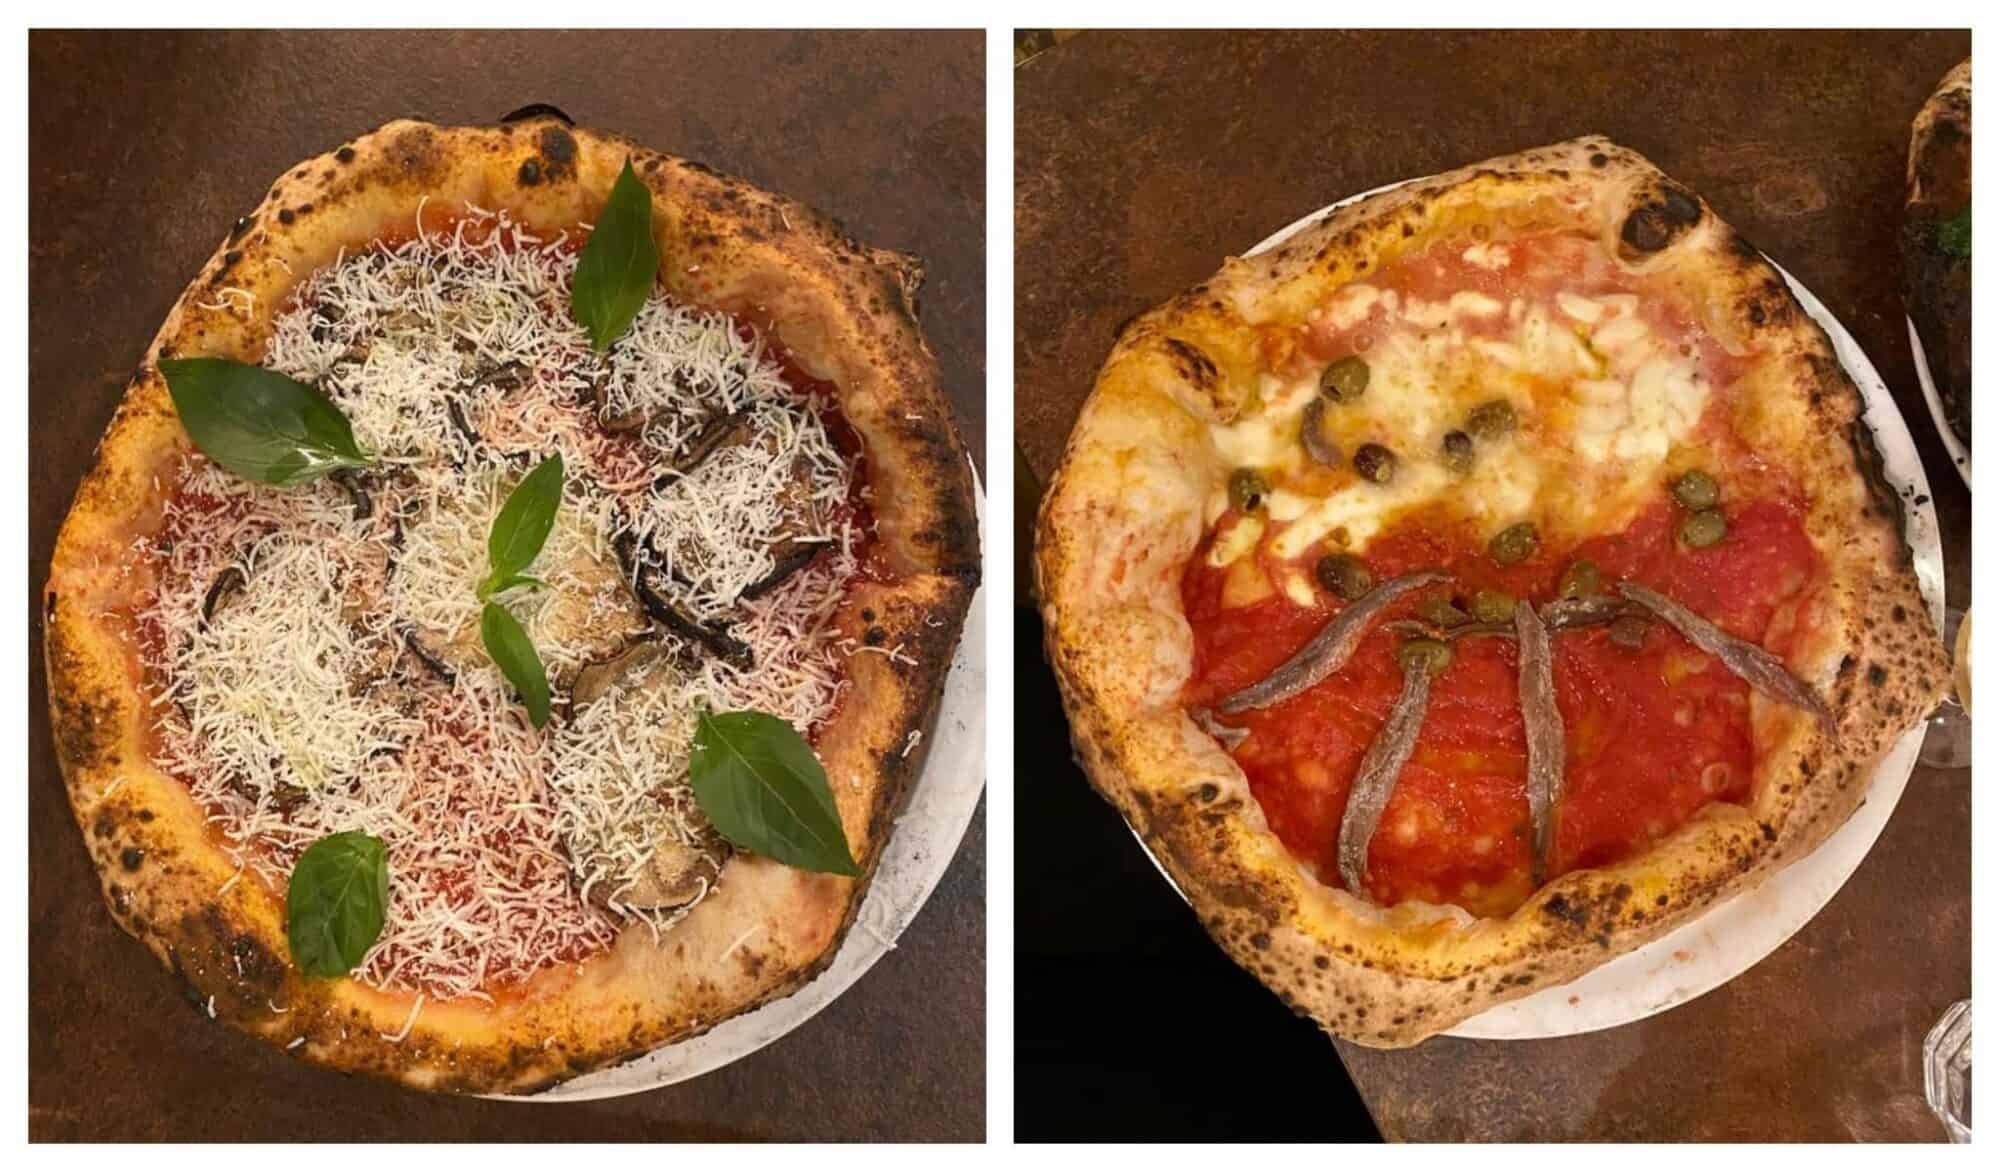 Left: a pizza from Faggio covered in grated parmesan and a basil leaves; RIght: a pizza from Faggio with half of it fovered in cheese and capers and the other half with only tomato sauces and anchovies.